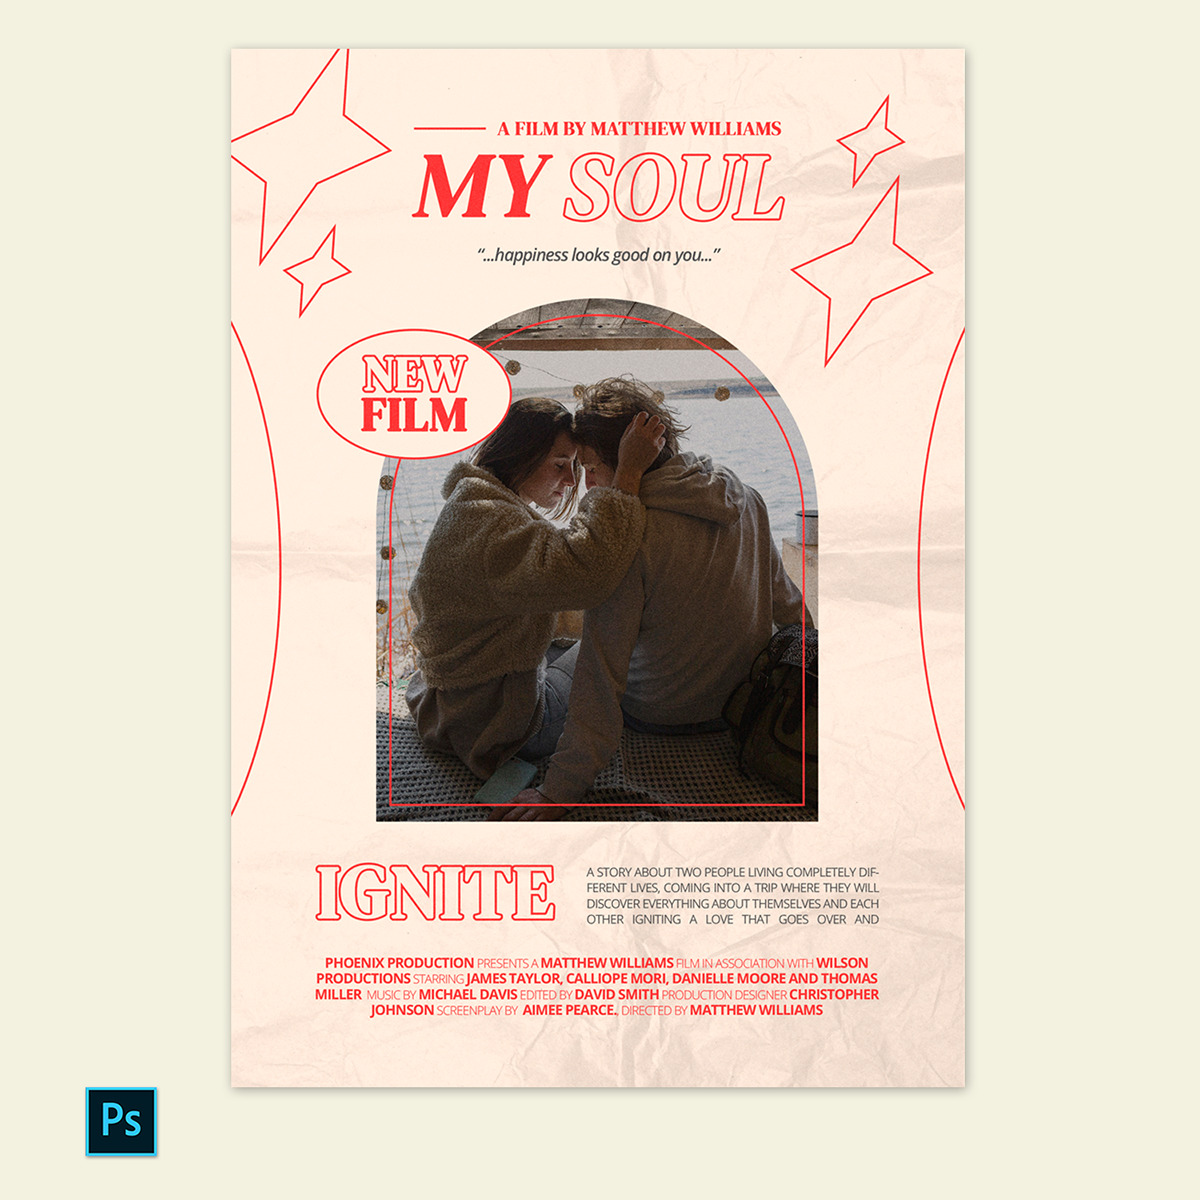 Movie poster template PSD - Free Photoshop